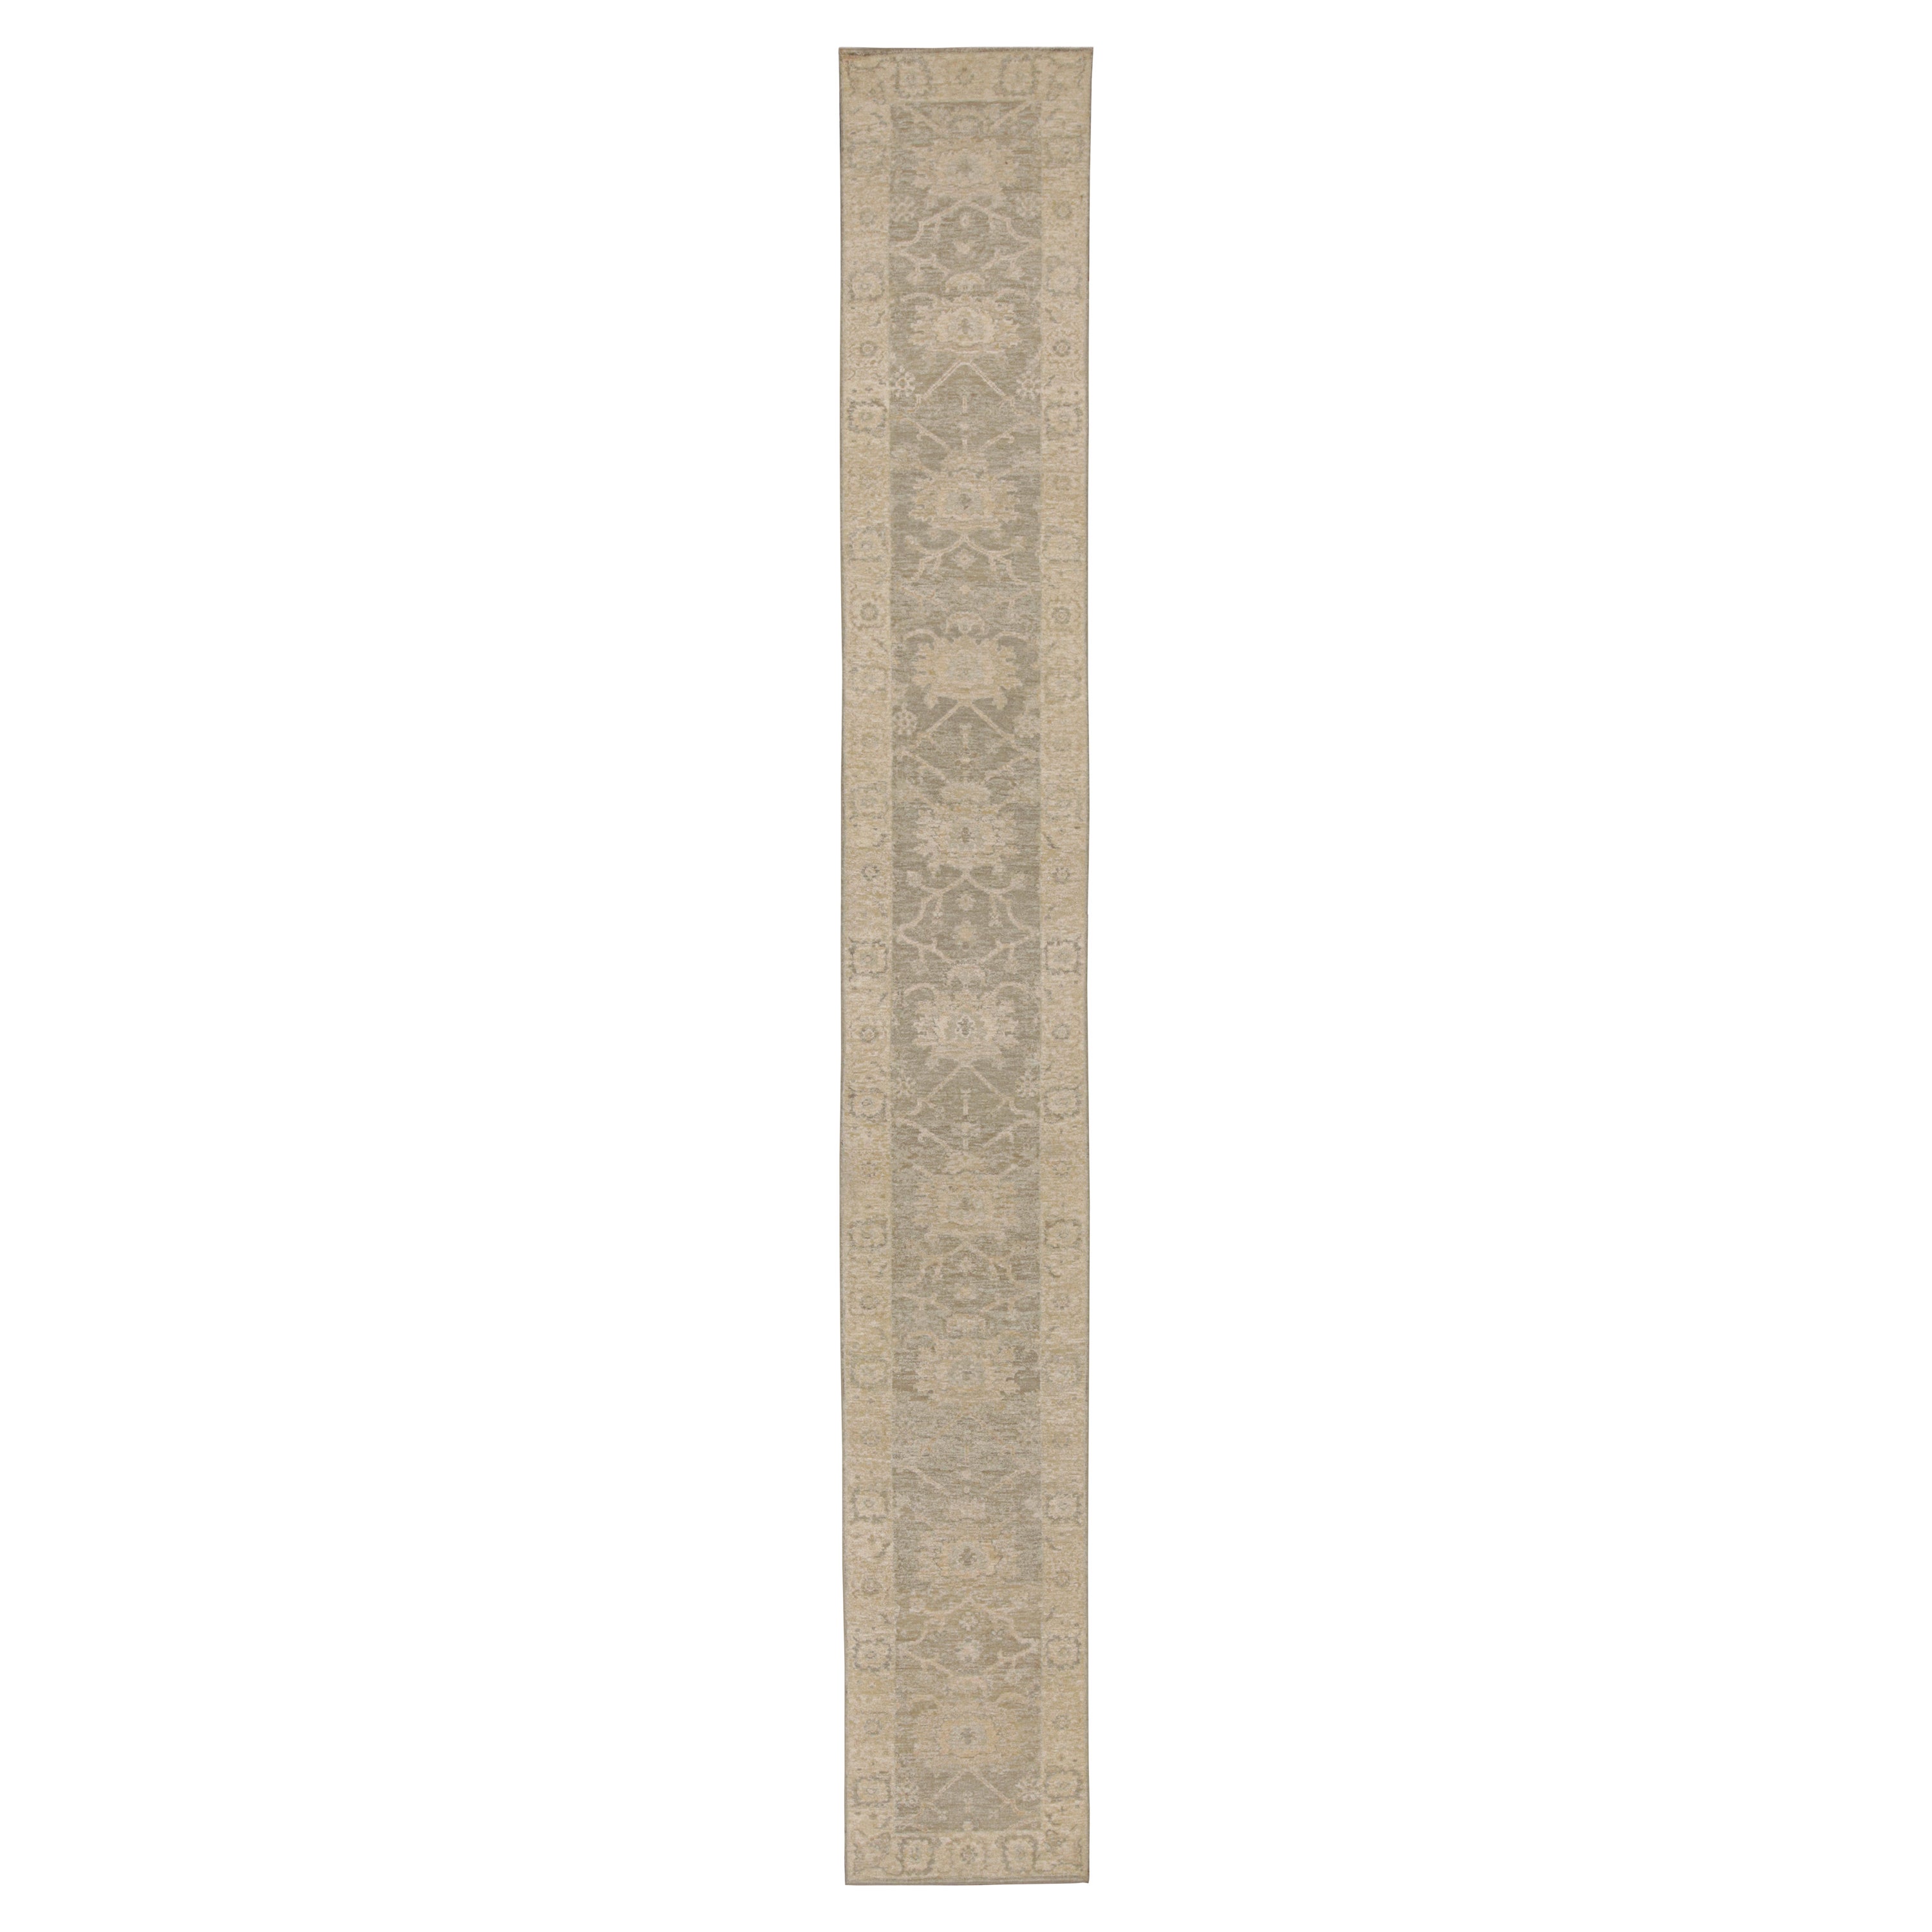 Rug & Kilim’s Oushak Style Runner Rug in Beige/Brown, With Floral Patterns For Sale